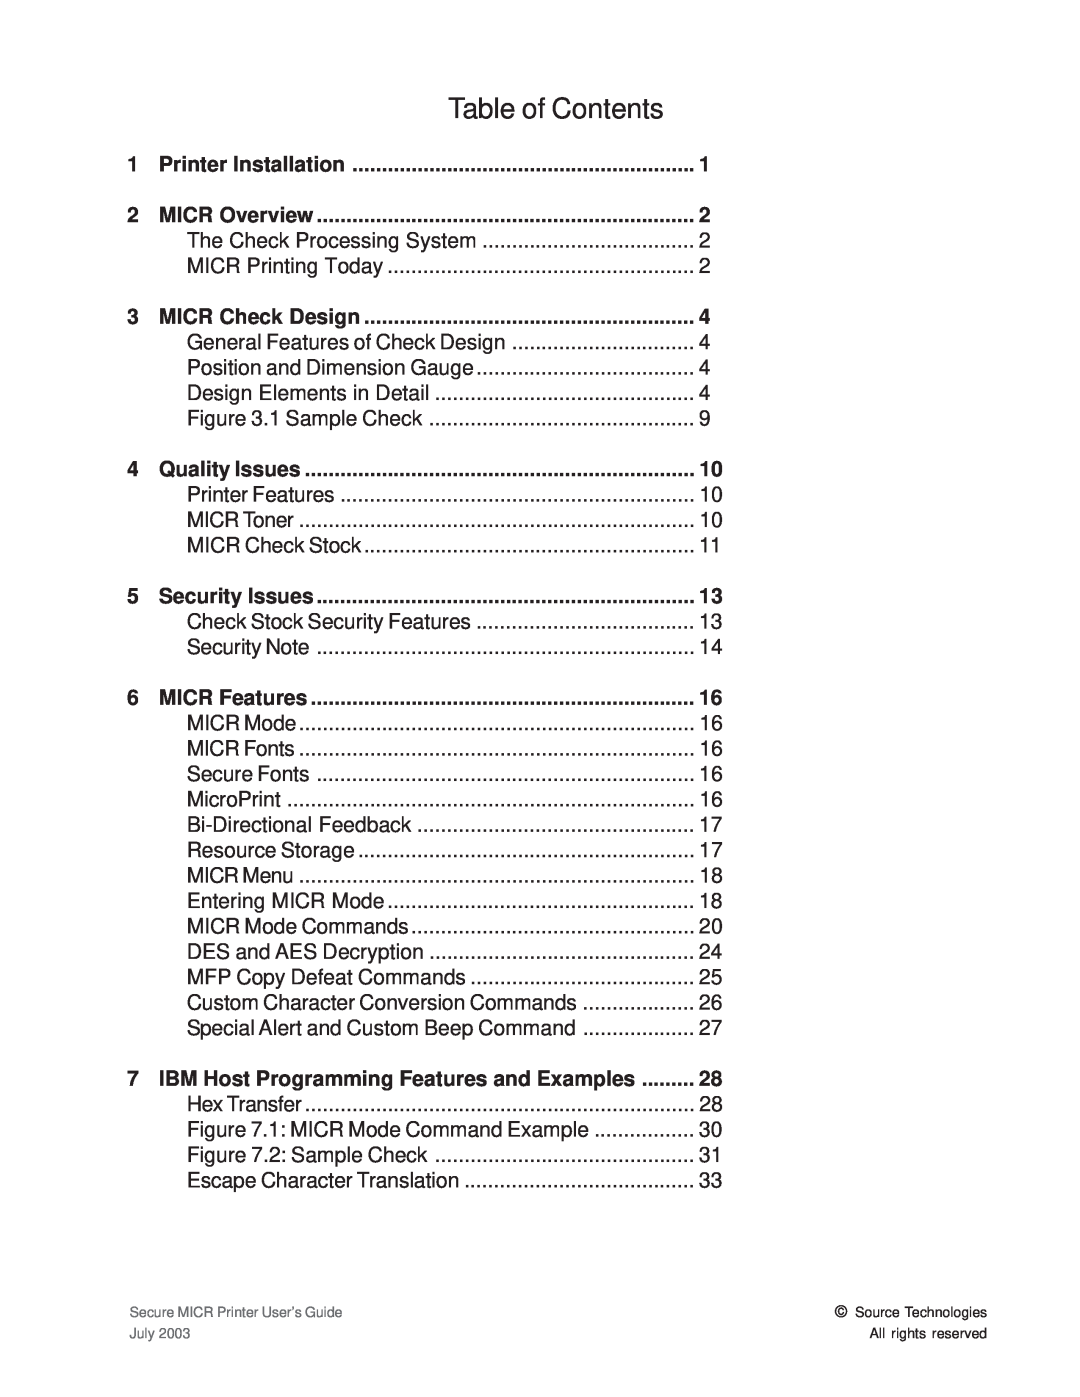 Source Technologies 1352 MICR 40 Table of Contents, Printer Installation, MICR Overview, MICR Check Design, Quality Issues 